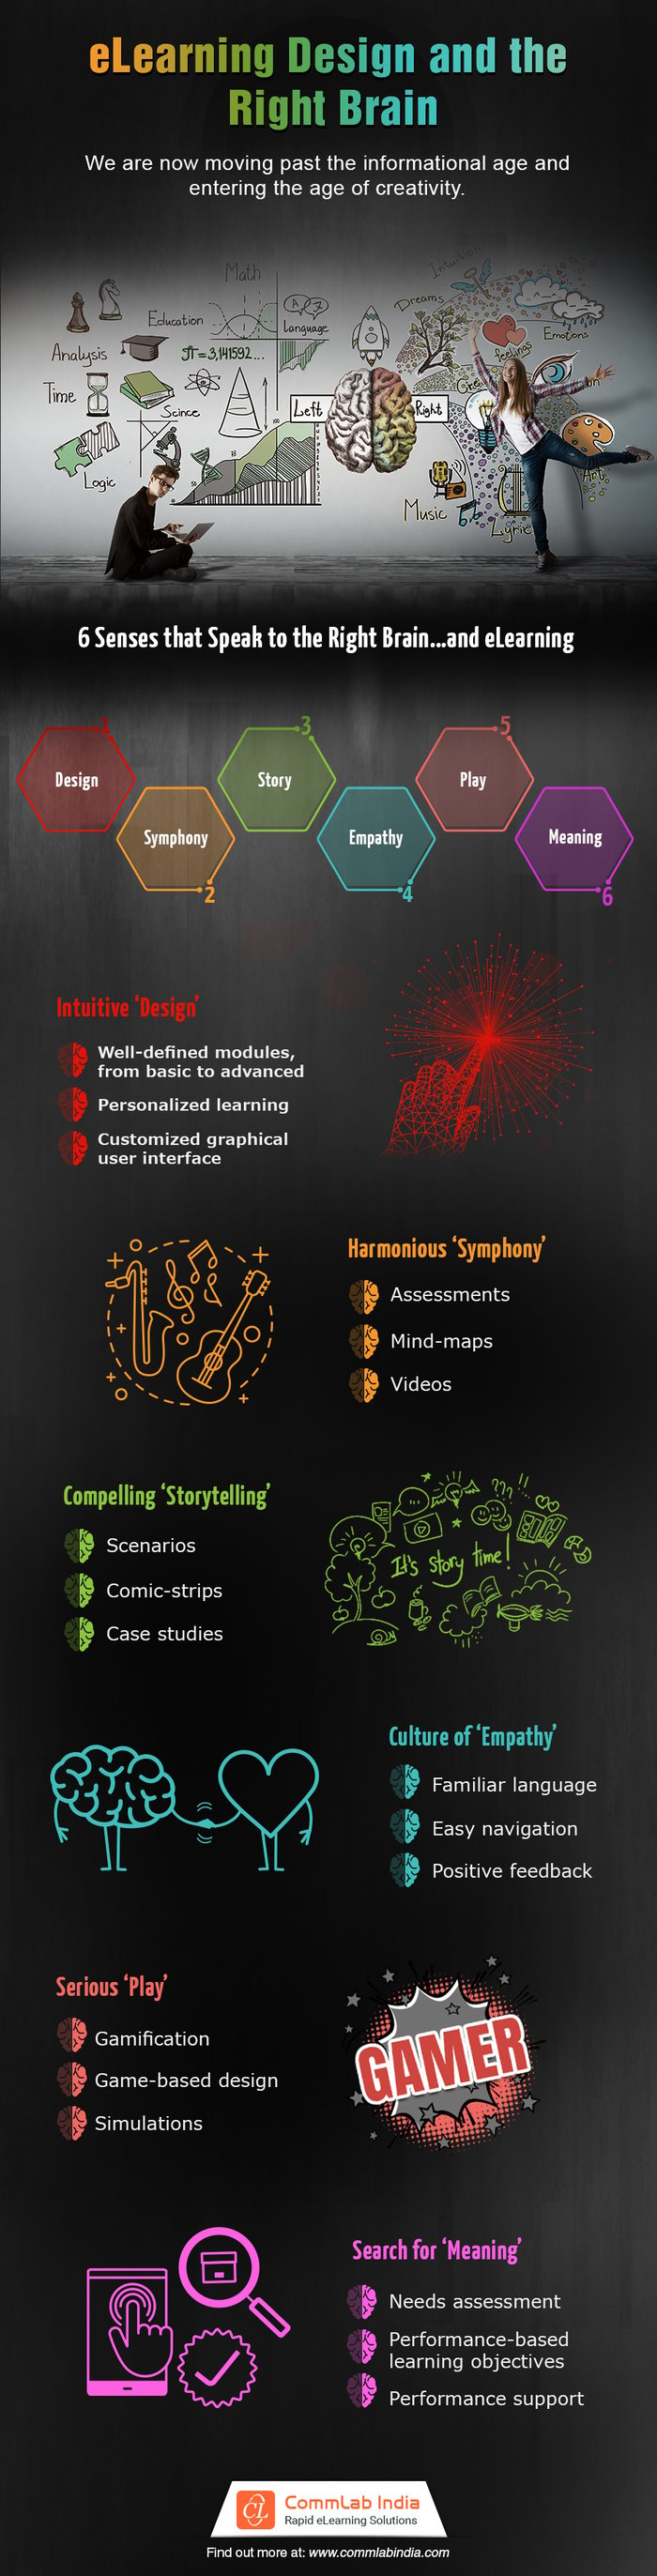 eLearning Design and the Right Brain [Infographic]